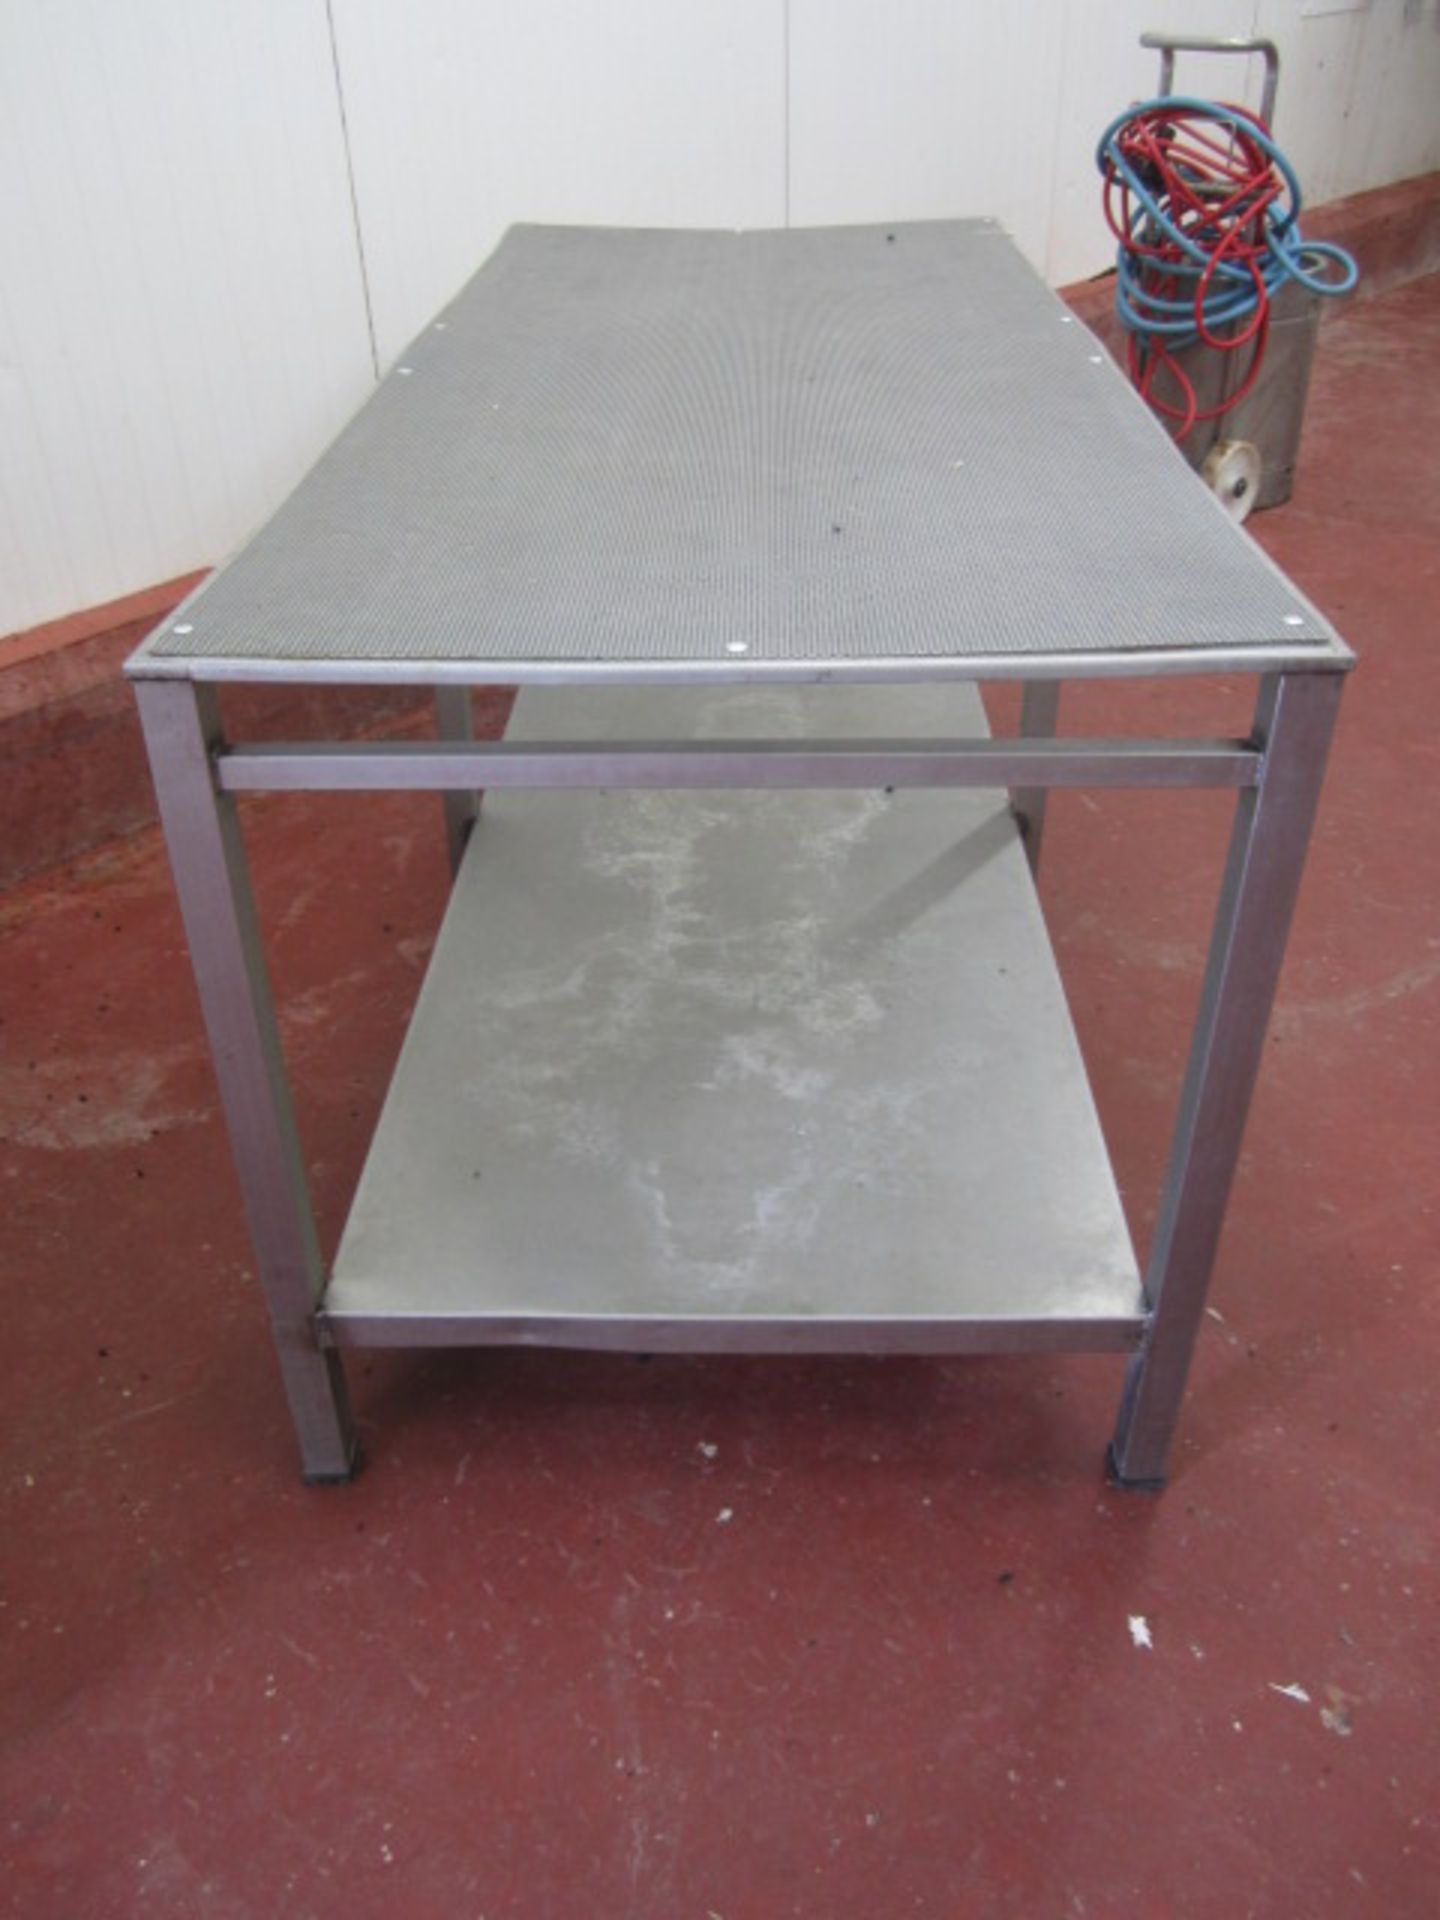 Stainless Steel framed worktable with mesh work top and undershelf, 1760mm x 760mm - Image 2 of 3